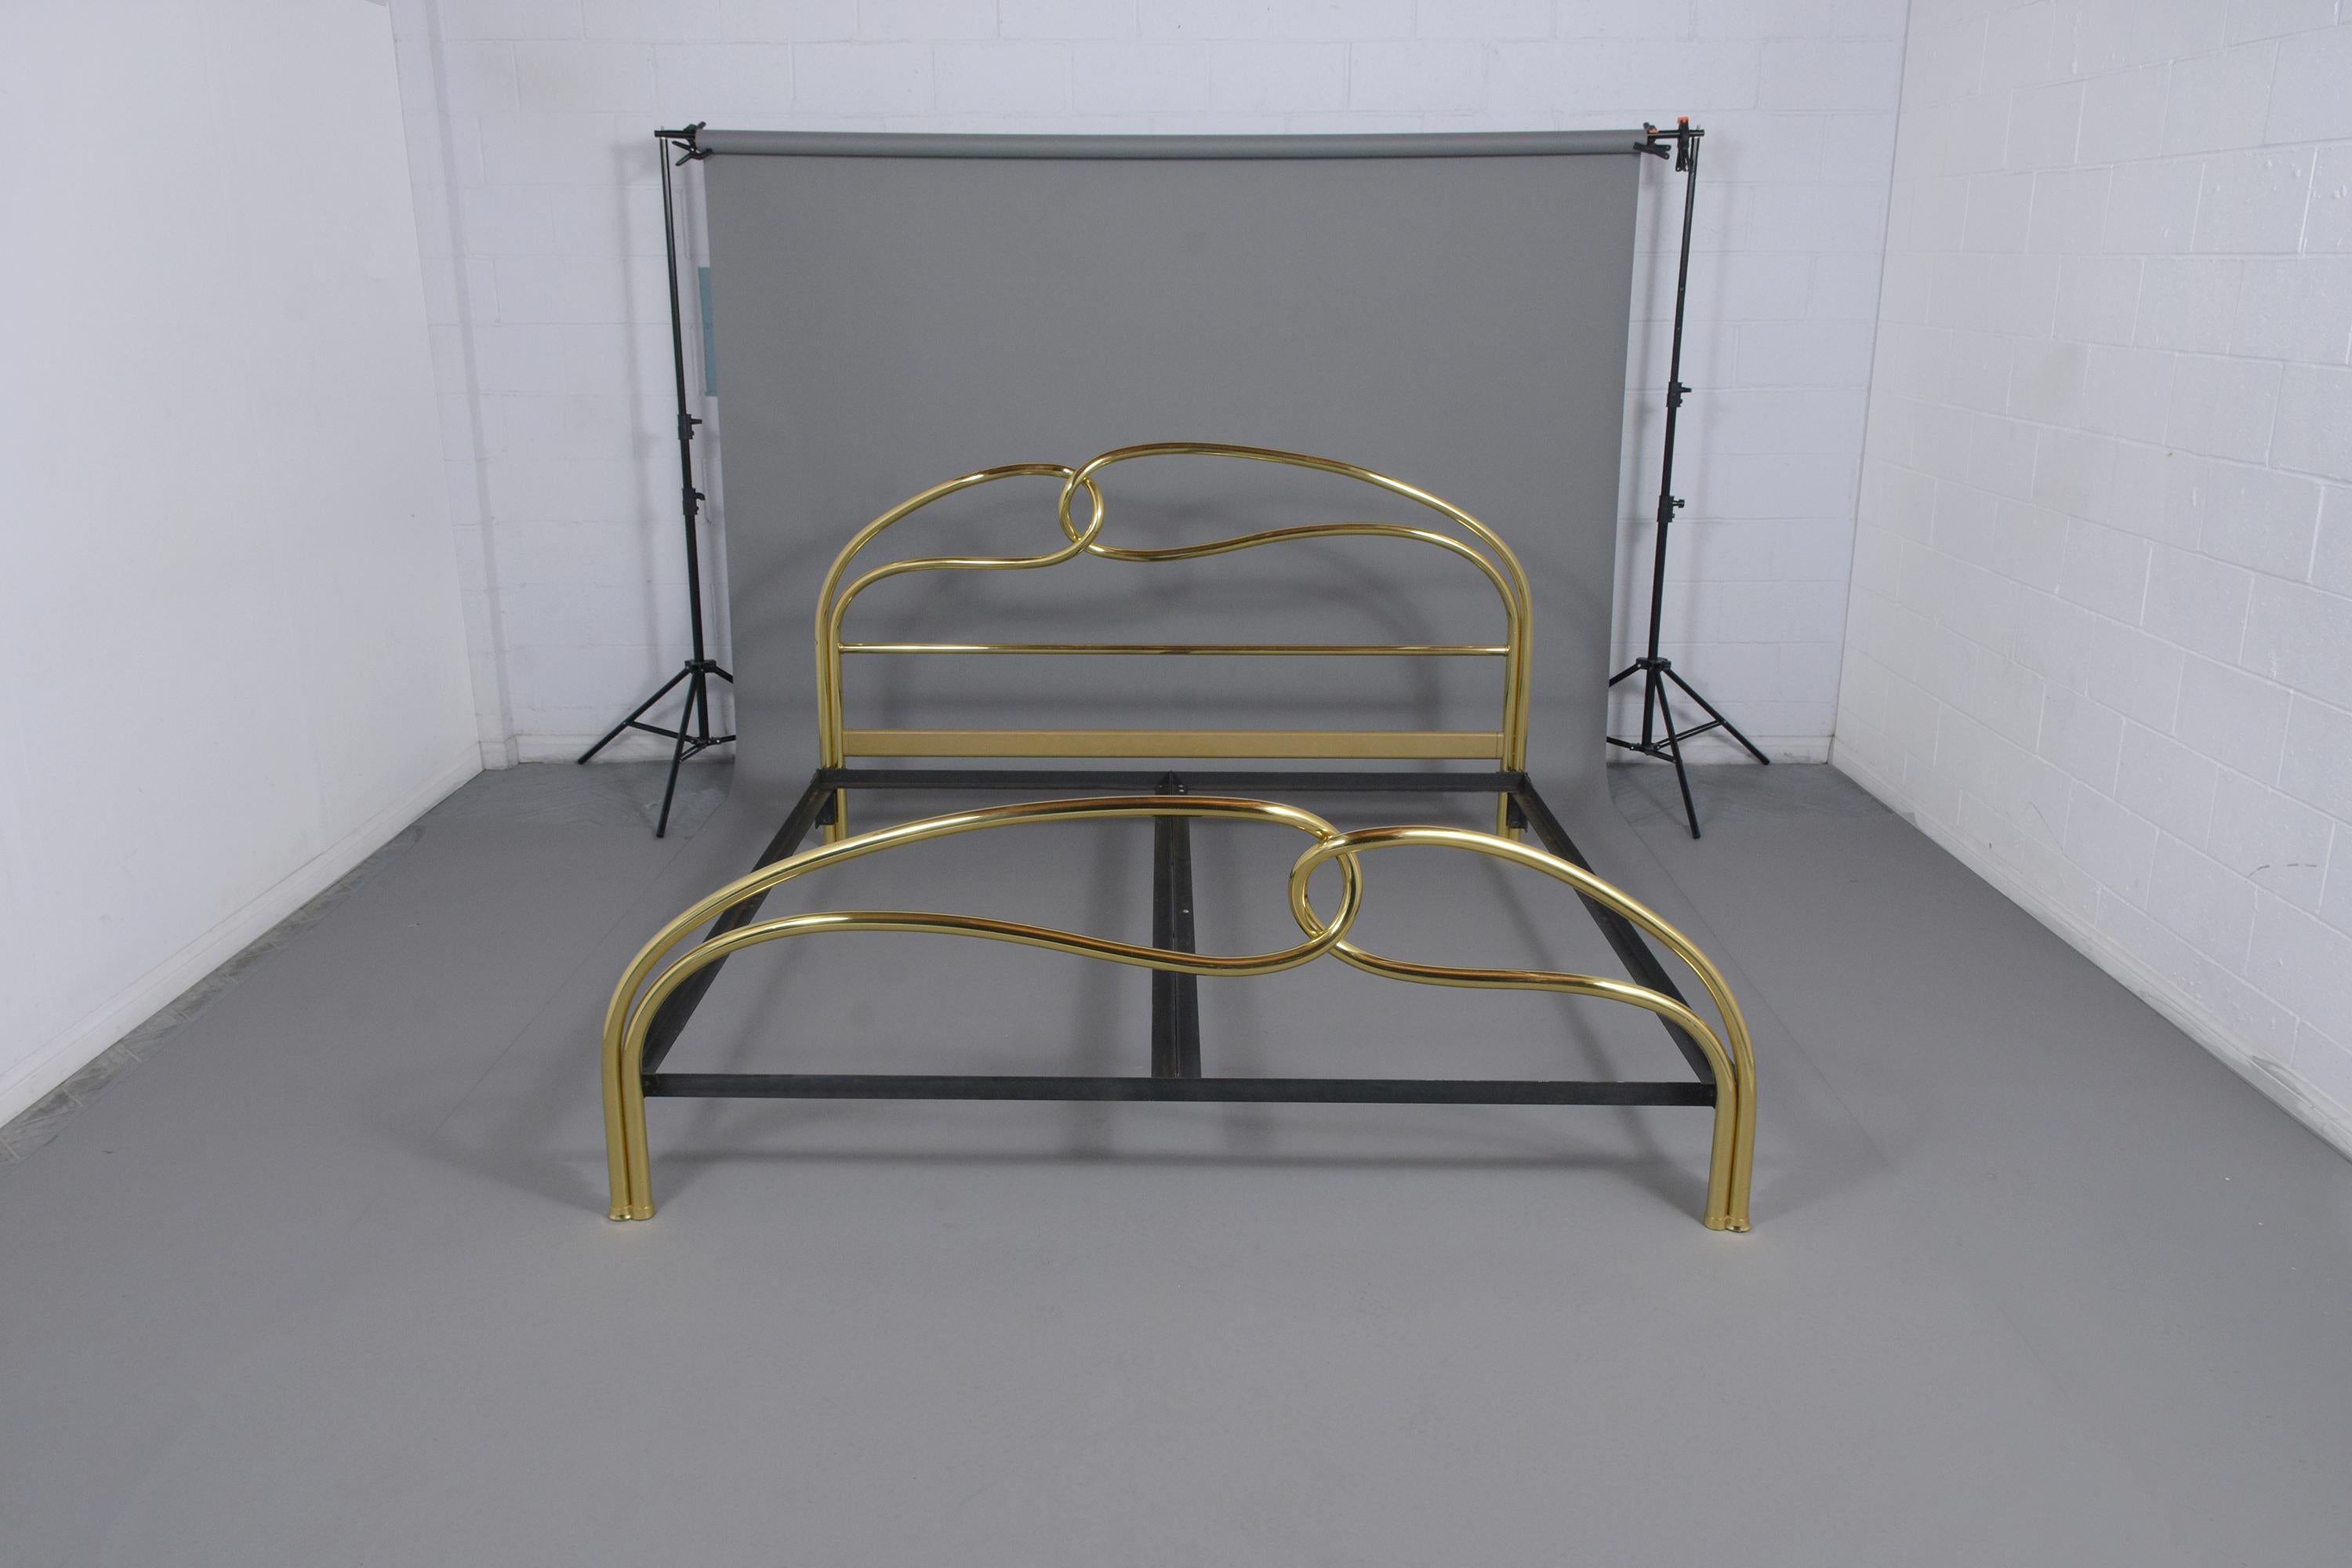 A vintage Mid-Century Modern Italian king-size bed frame hand-crafted out of brass features a unique design on the headboard and footboard, and original metal rails painted in black color. This art deco style bed frame is in great condition a